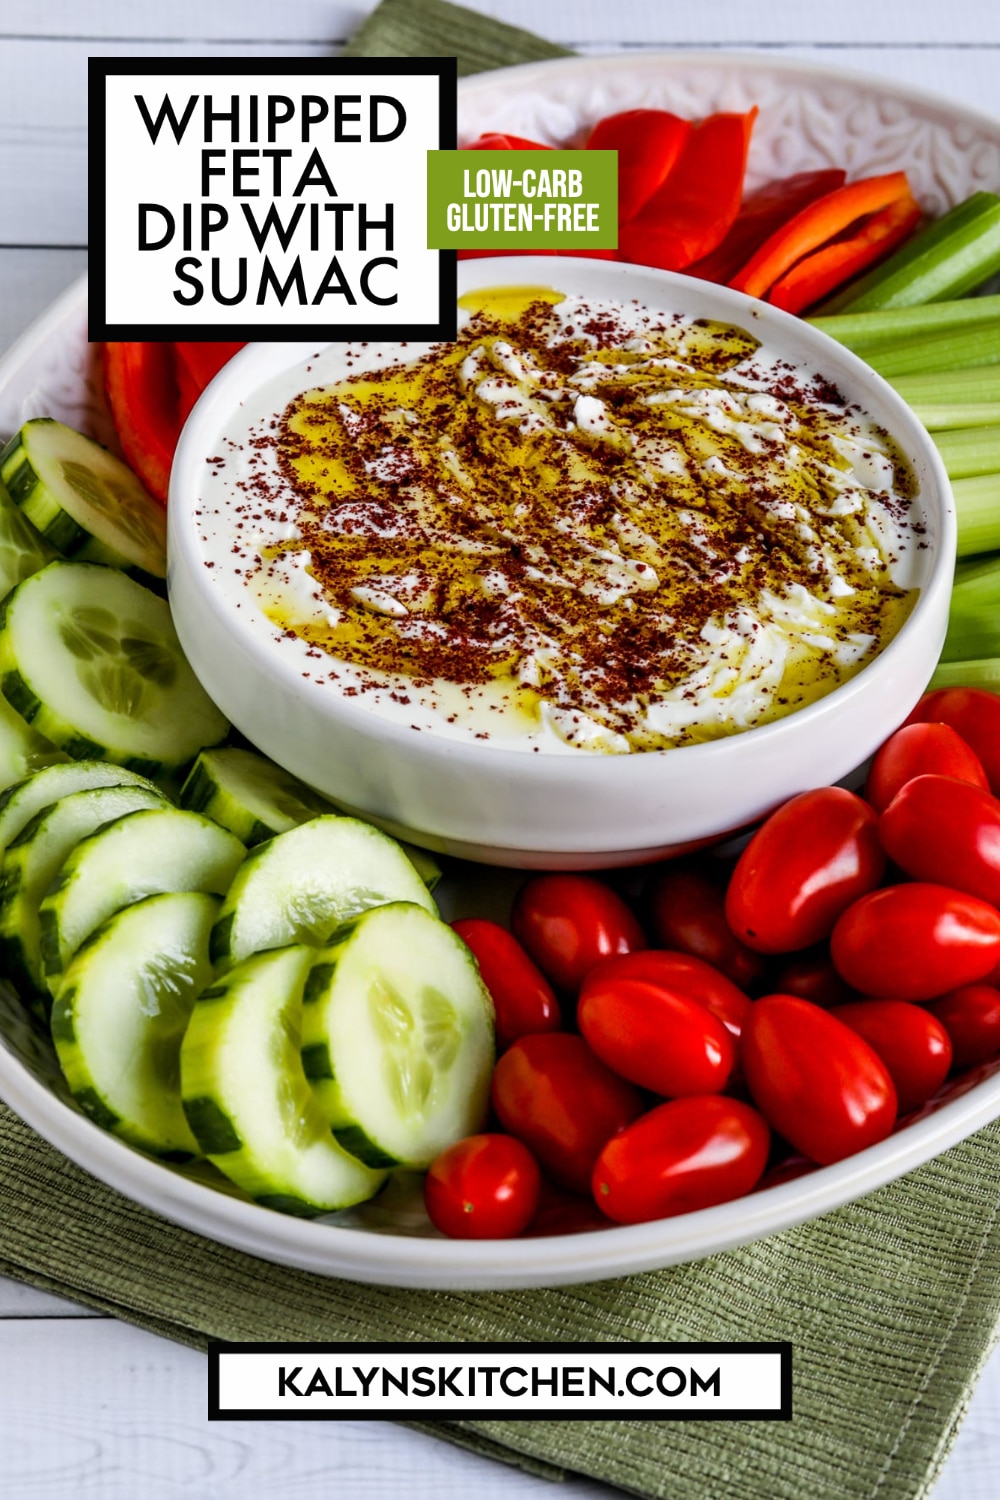 Pinterest image of Whipped Feta Dip with Sumac